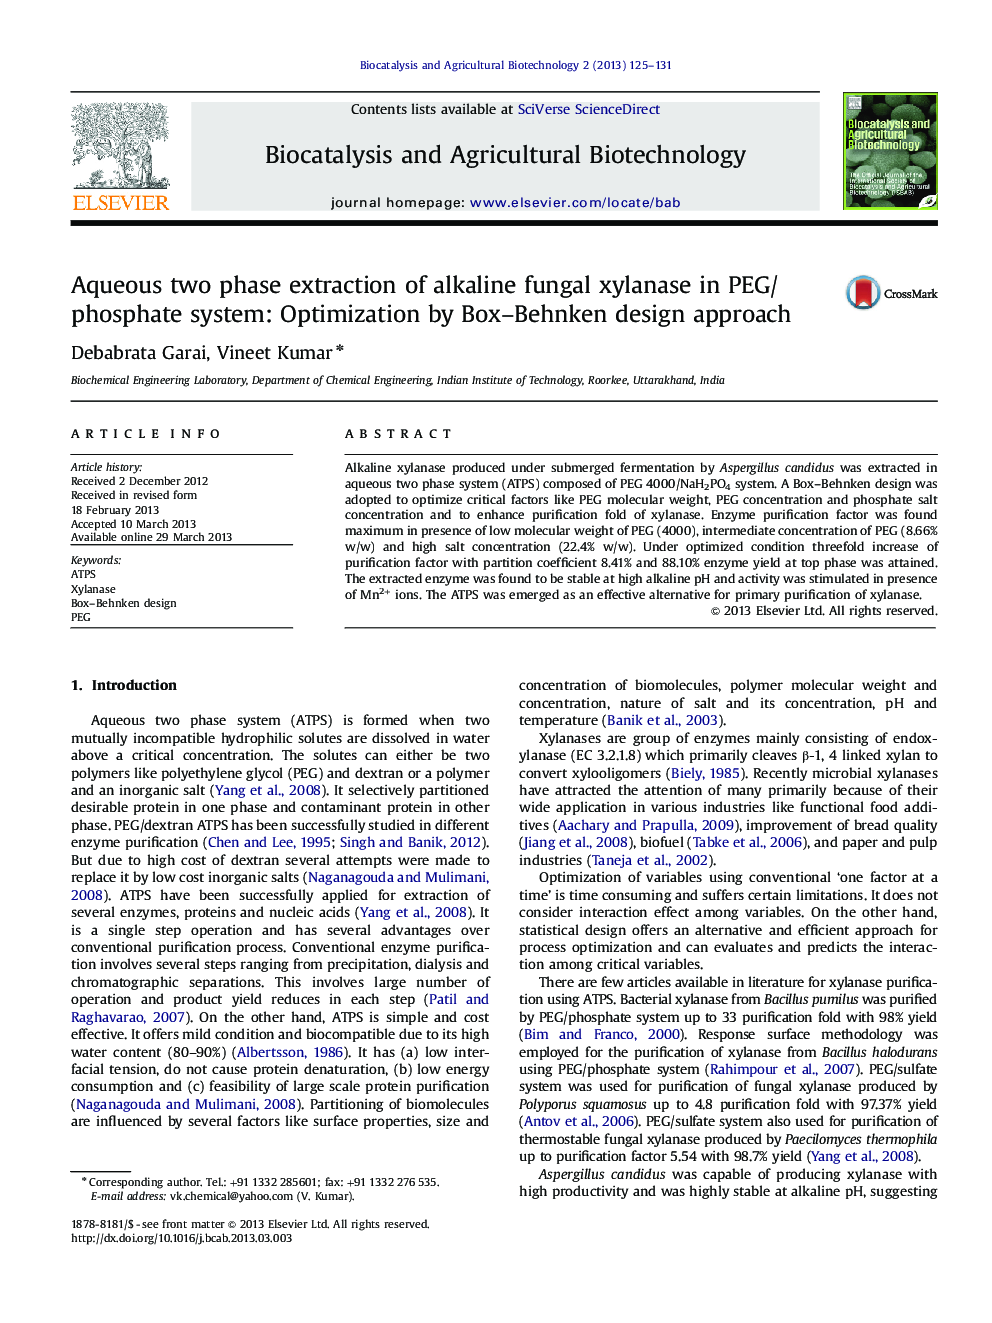 Aqueous two phase extraction of alkaline fungal xylanase in PEG/phosphate system: Optimization by Box–Behnken design approach